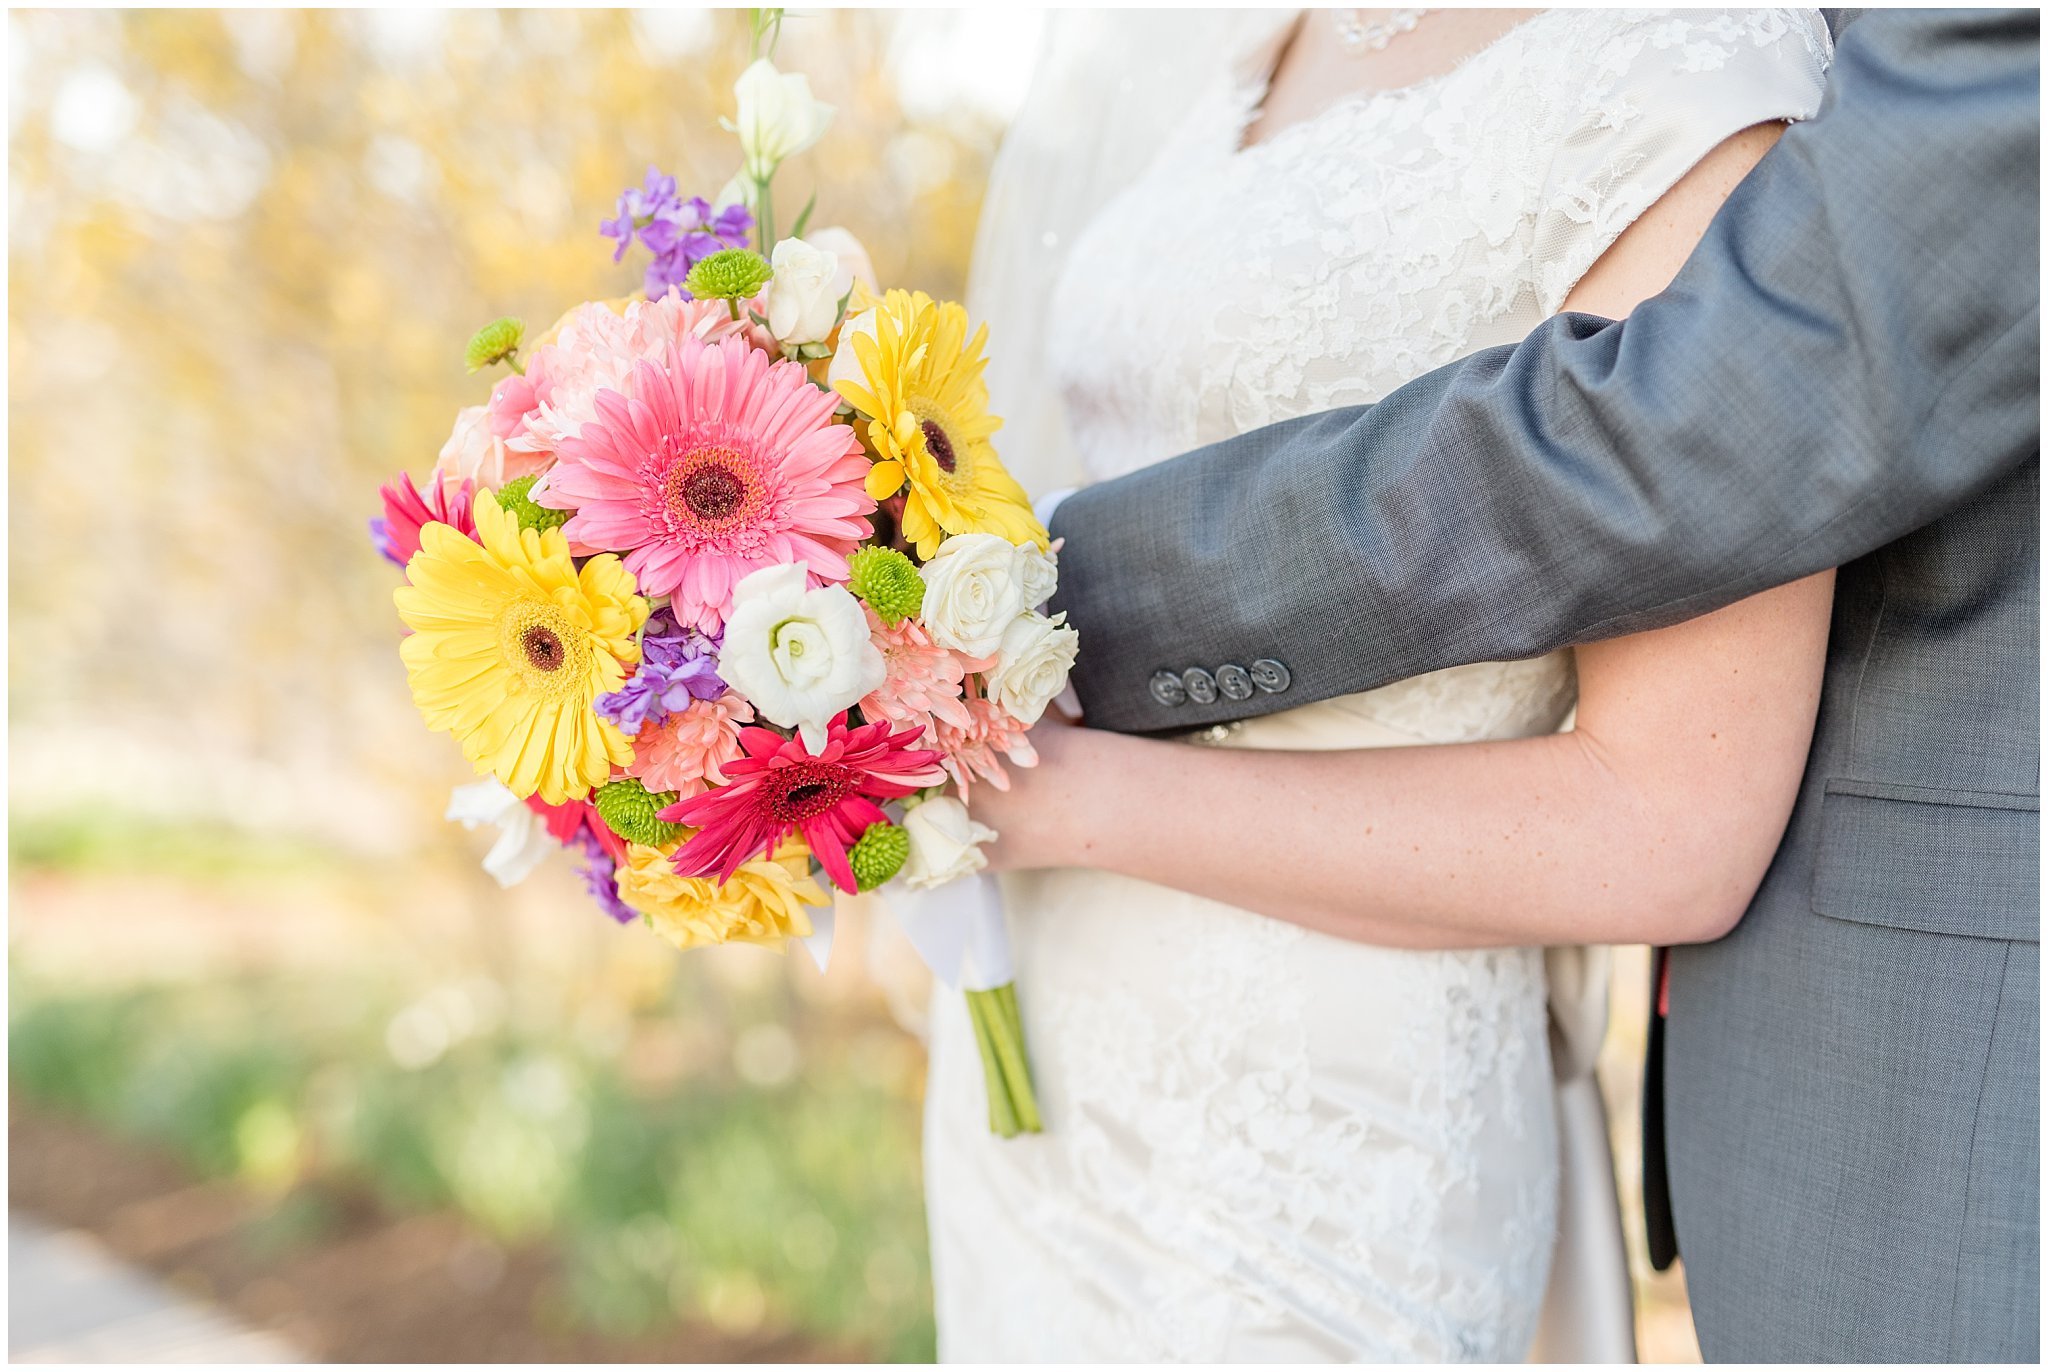 Thanksgiving Point Wedding | Spring Bride and Groom portraits | Garden Wedding Photography | Bright colored bouquet